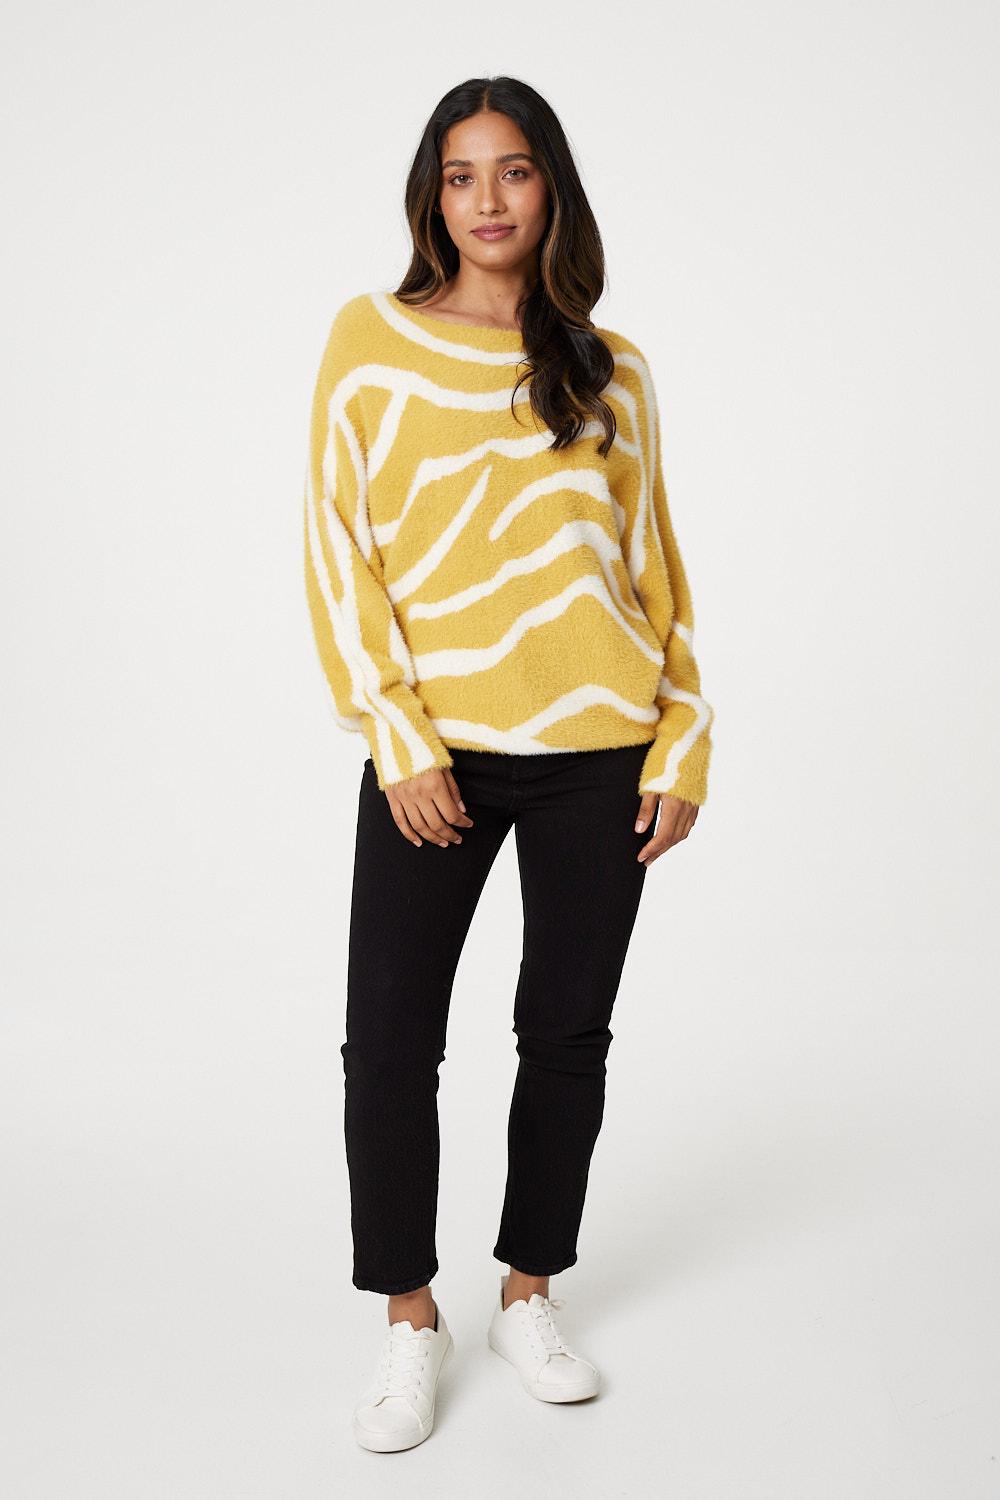 Yellow | Printed Batwing Sleeve Knit Jumper : Model is 5'7.5"/171 cm and wears UK8/EU36/US4/AUS8